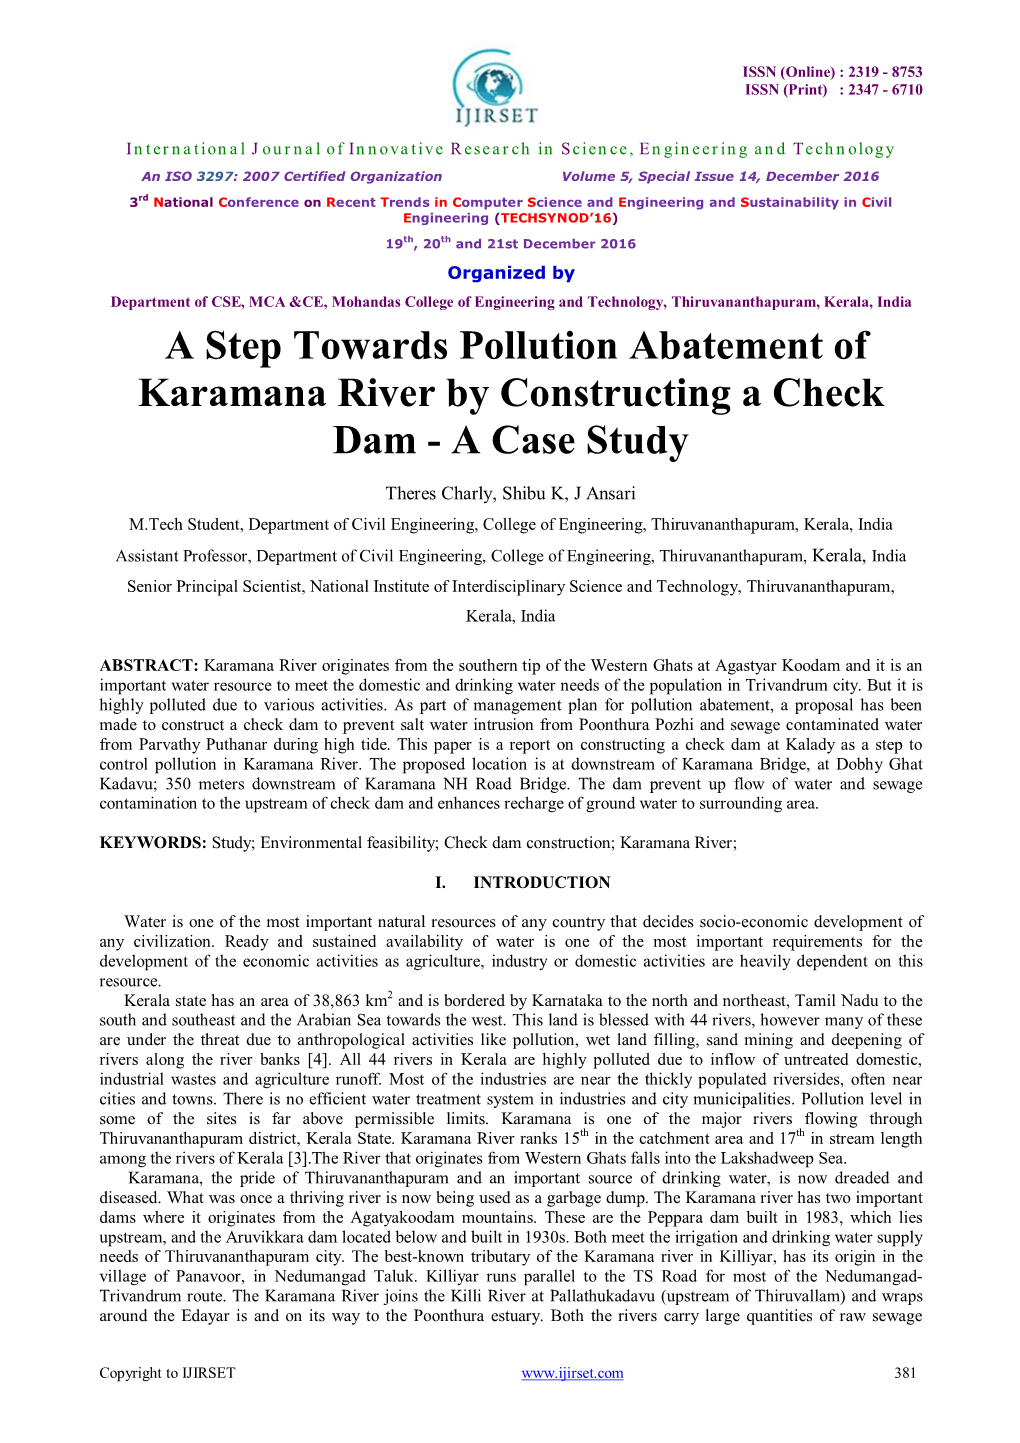 A Step Towards Pollution Abatement of Karamana River by Constructing a Check Dam - a Case Study